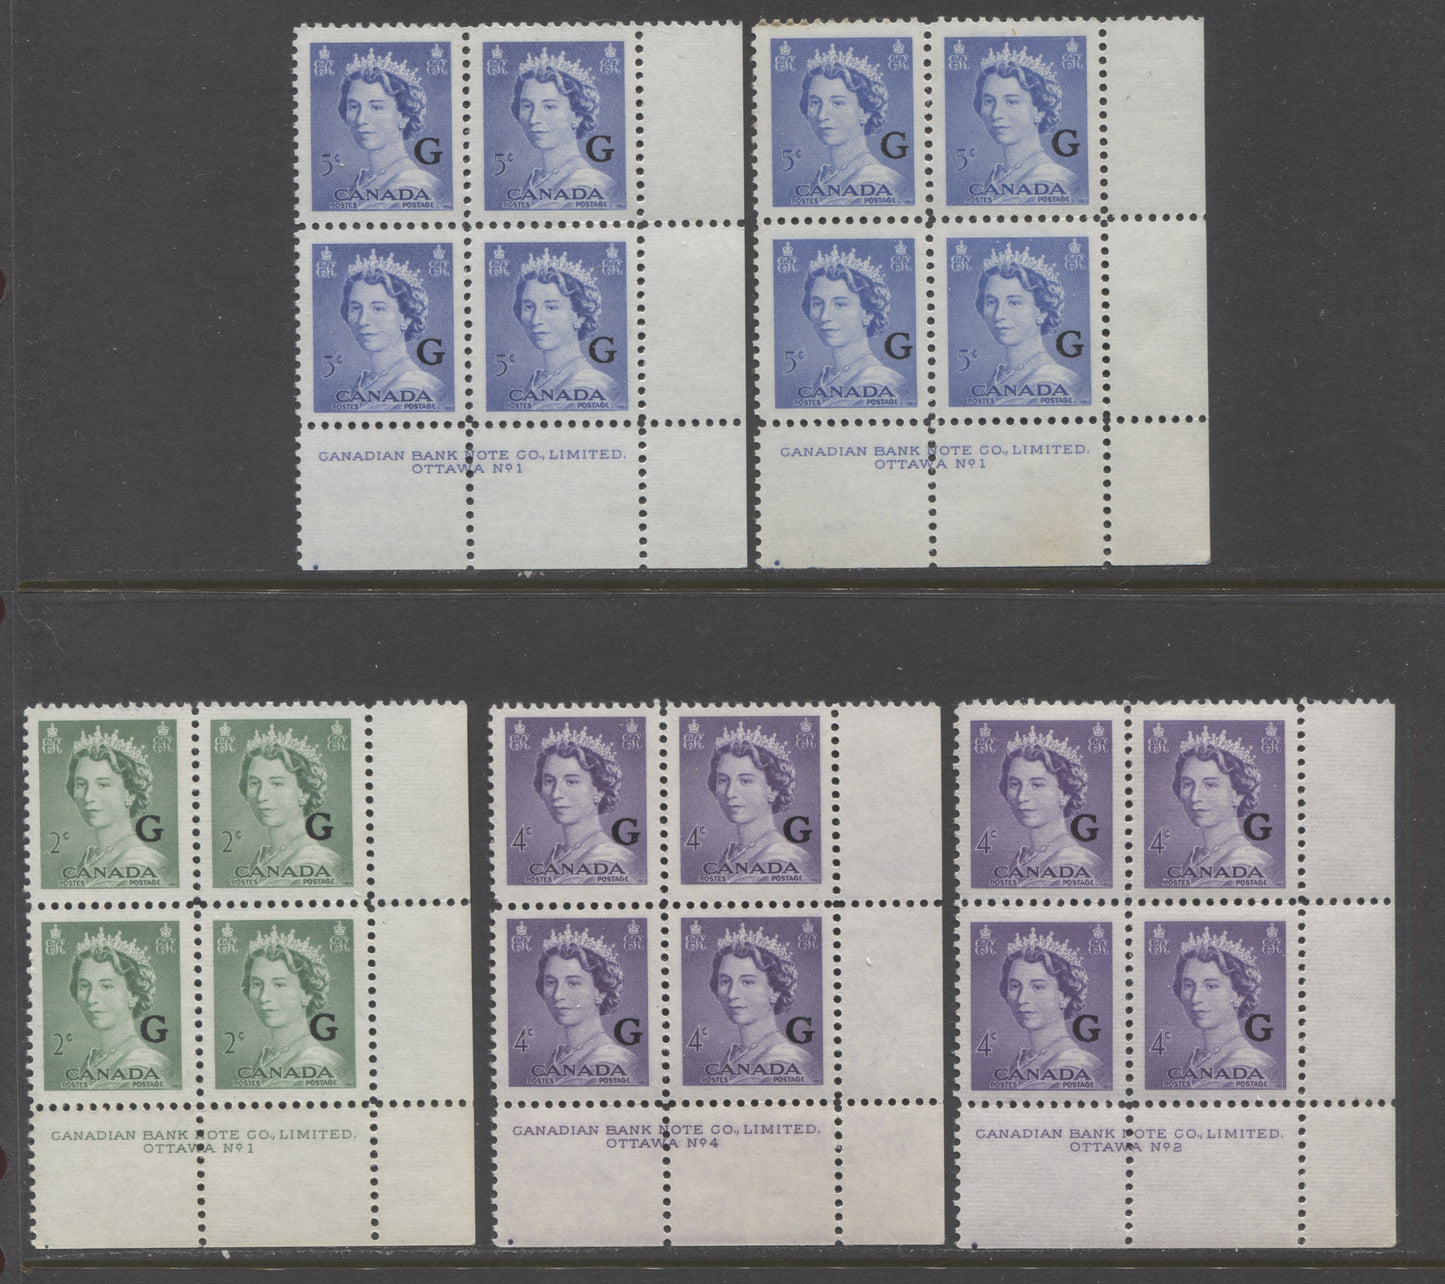 Lot 13 Canada #O34, O36-O37 2c/5c Green/Ultramarine Queen Elizabeth II, 1953 Karsh Issue G Overprint, 5 VFNH LR Plates 1,2 & 4 Blocks Of 4 On Horizontal Ribbed & Smooth Papers With Plate Dots In Selvedge At LL, Some Shade Variety